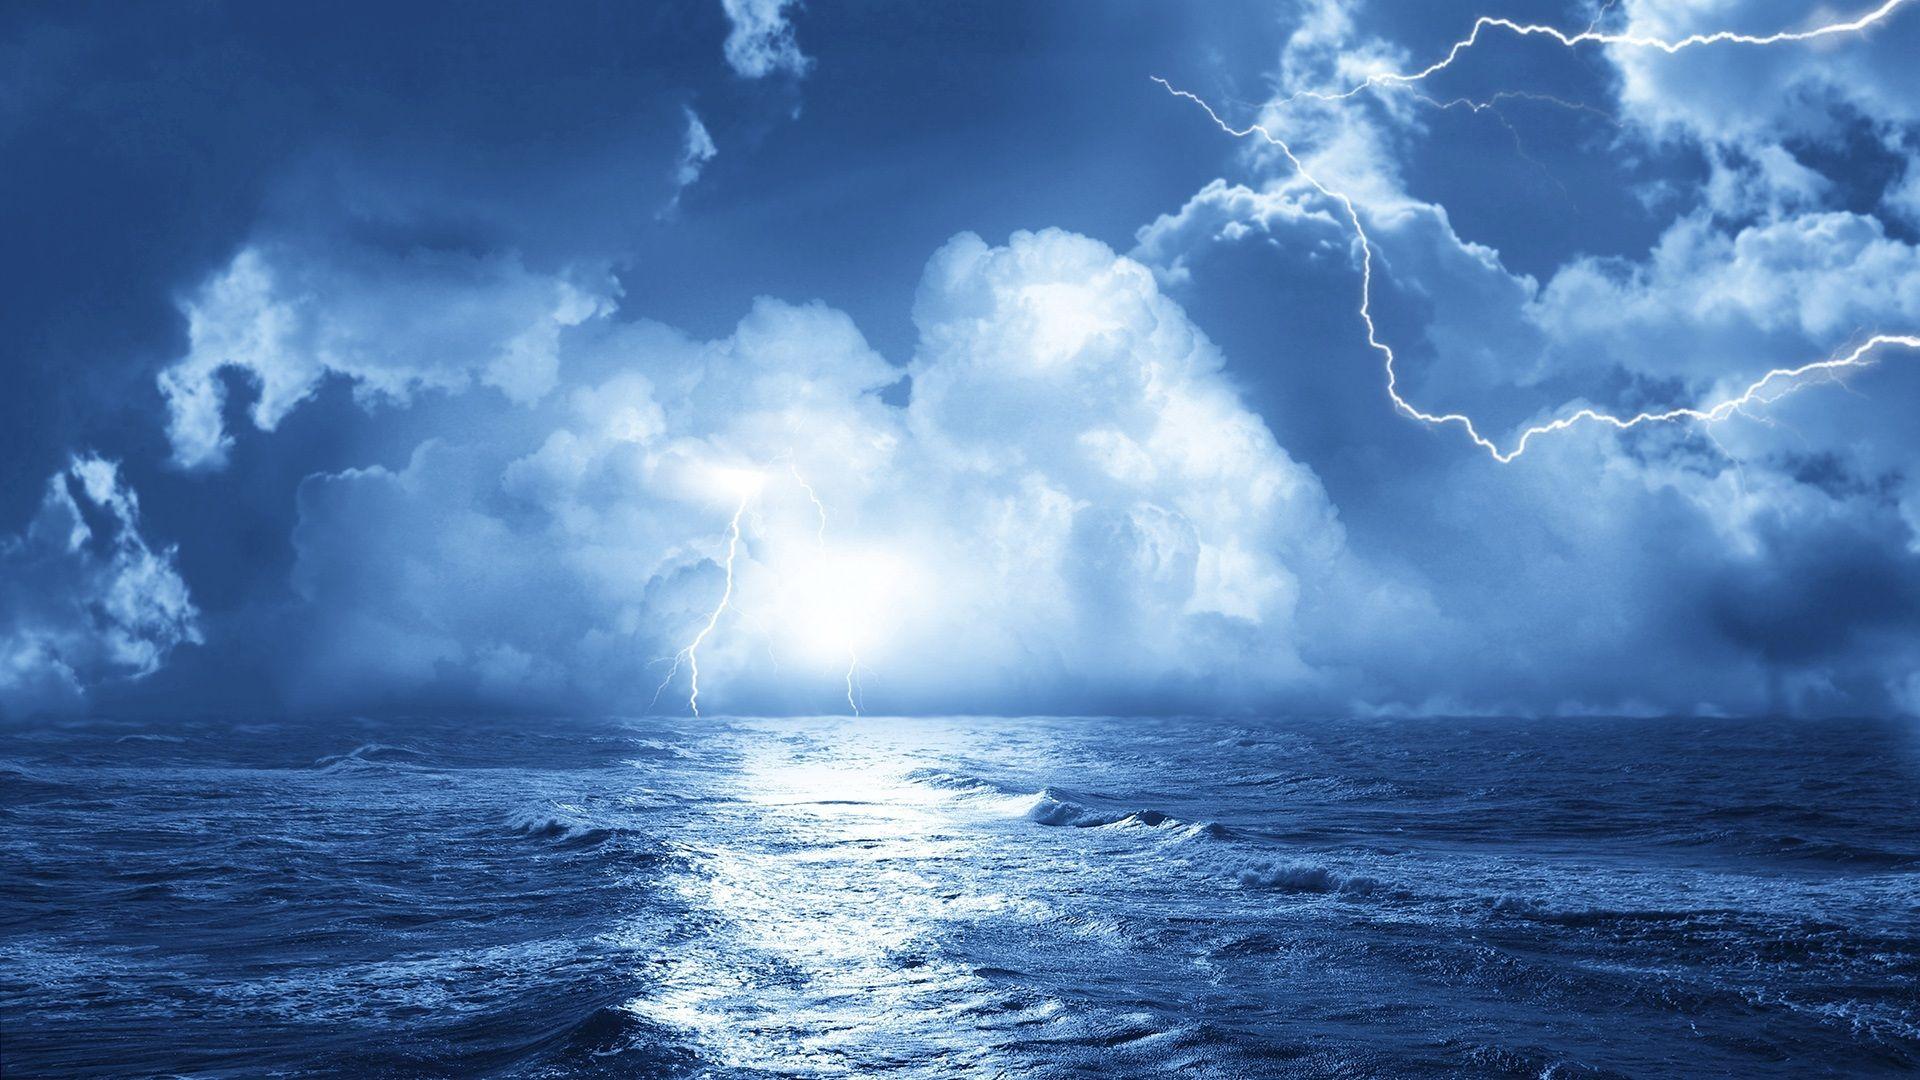 Storm Background, High Definition, High Quality, Widescreen